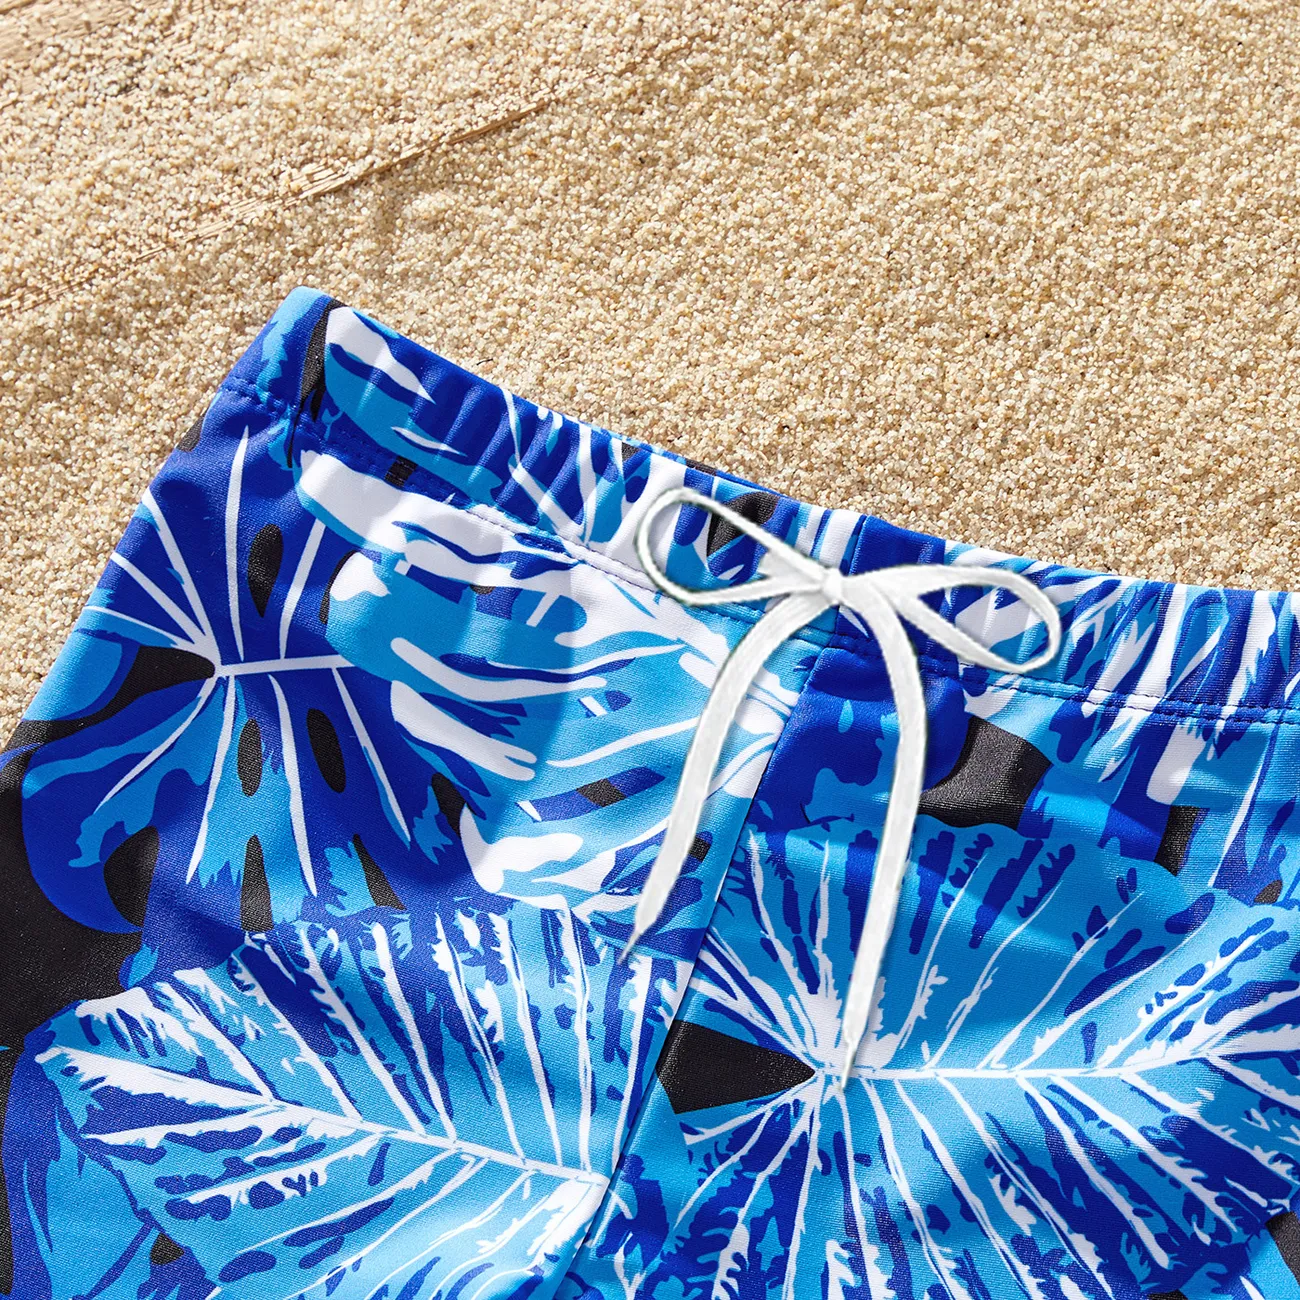 Family Matching Plant Print Ruffled Two-piece Swimsuit or Swim Trunks Shorts Blue big image 1